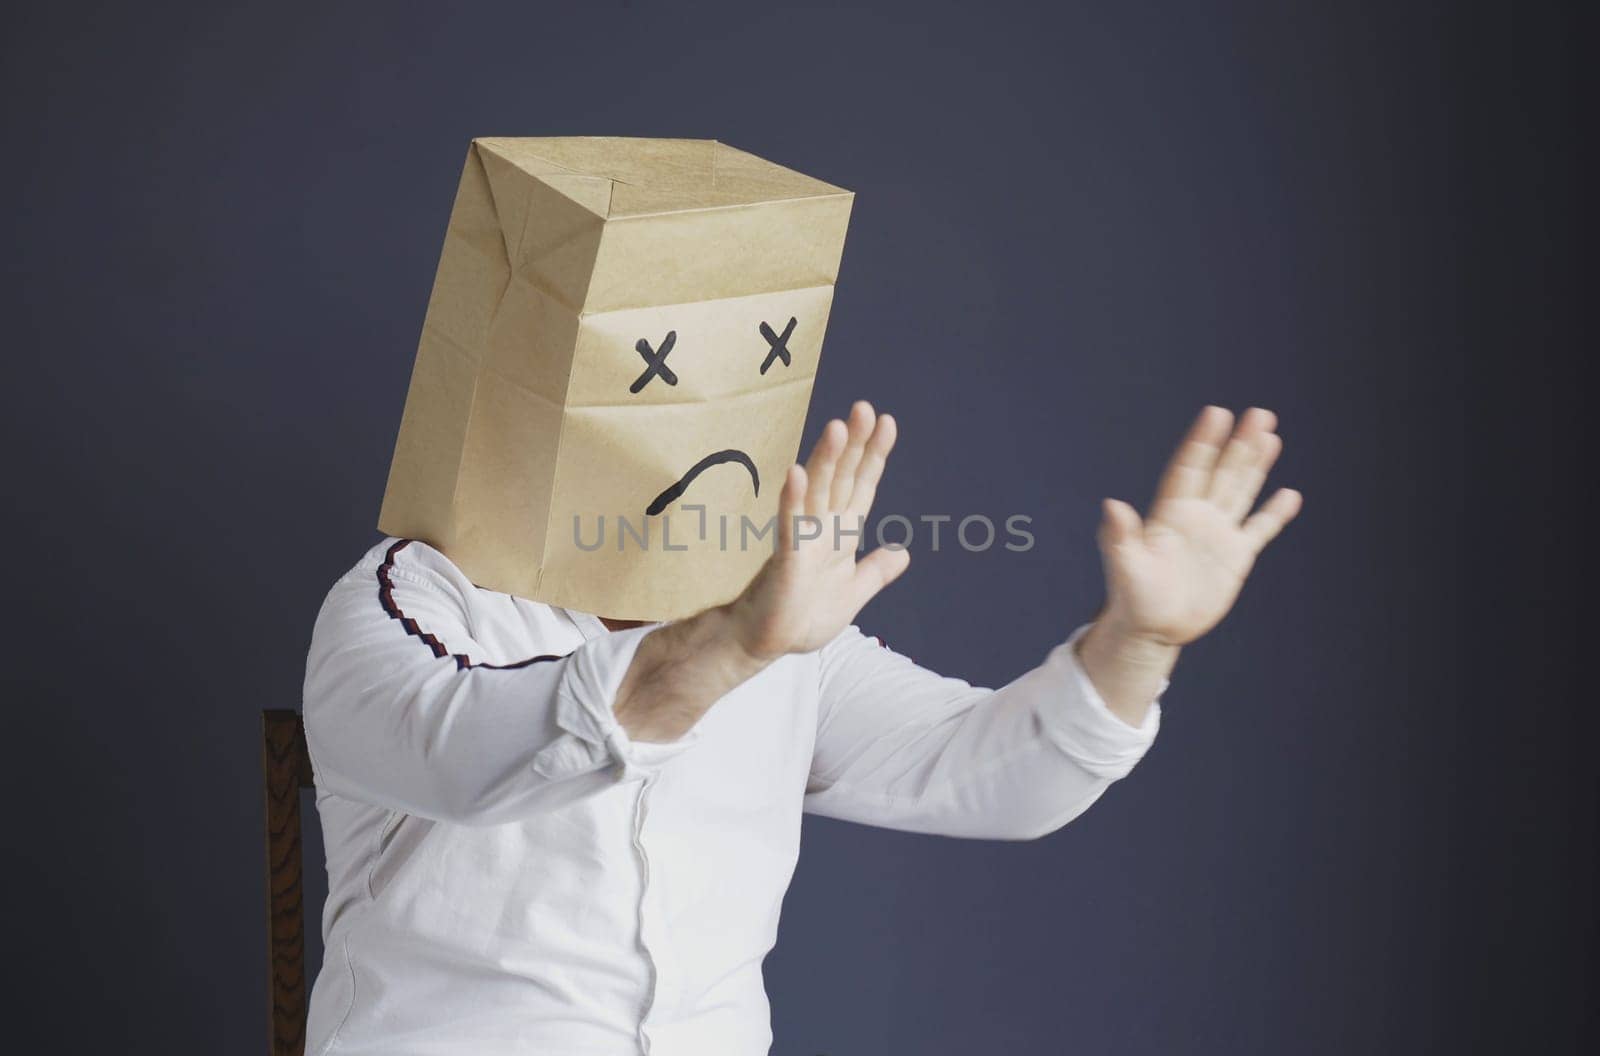 A sad man in a white shirt with a bag on his head, with a sad emoticon drawn, is afraid, defends himself by putting his hands forward. Emotions and gestures.